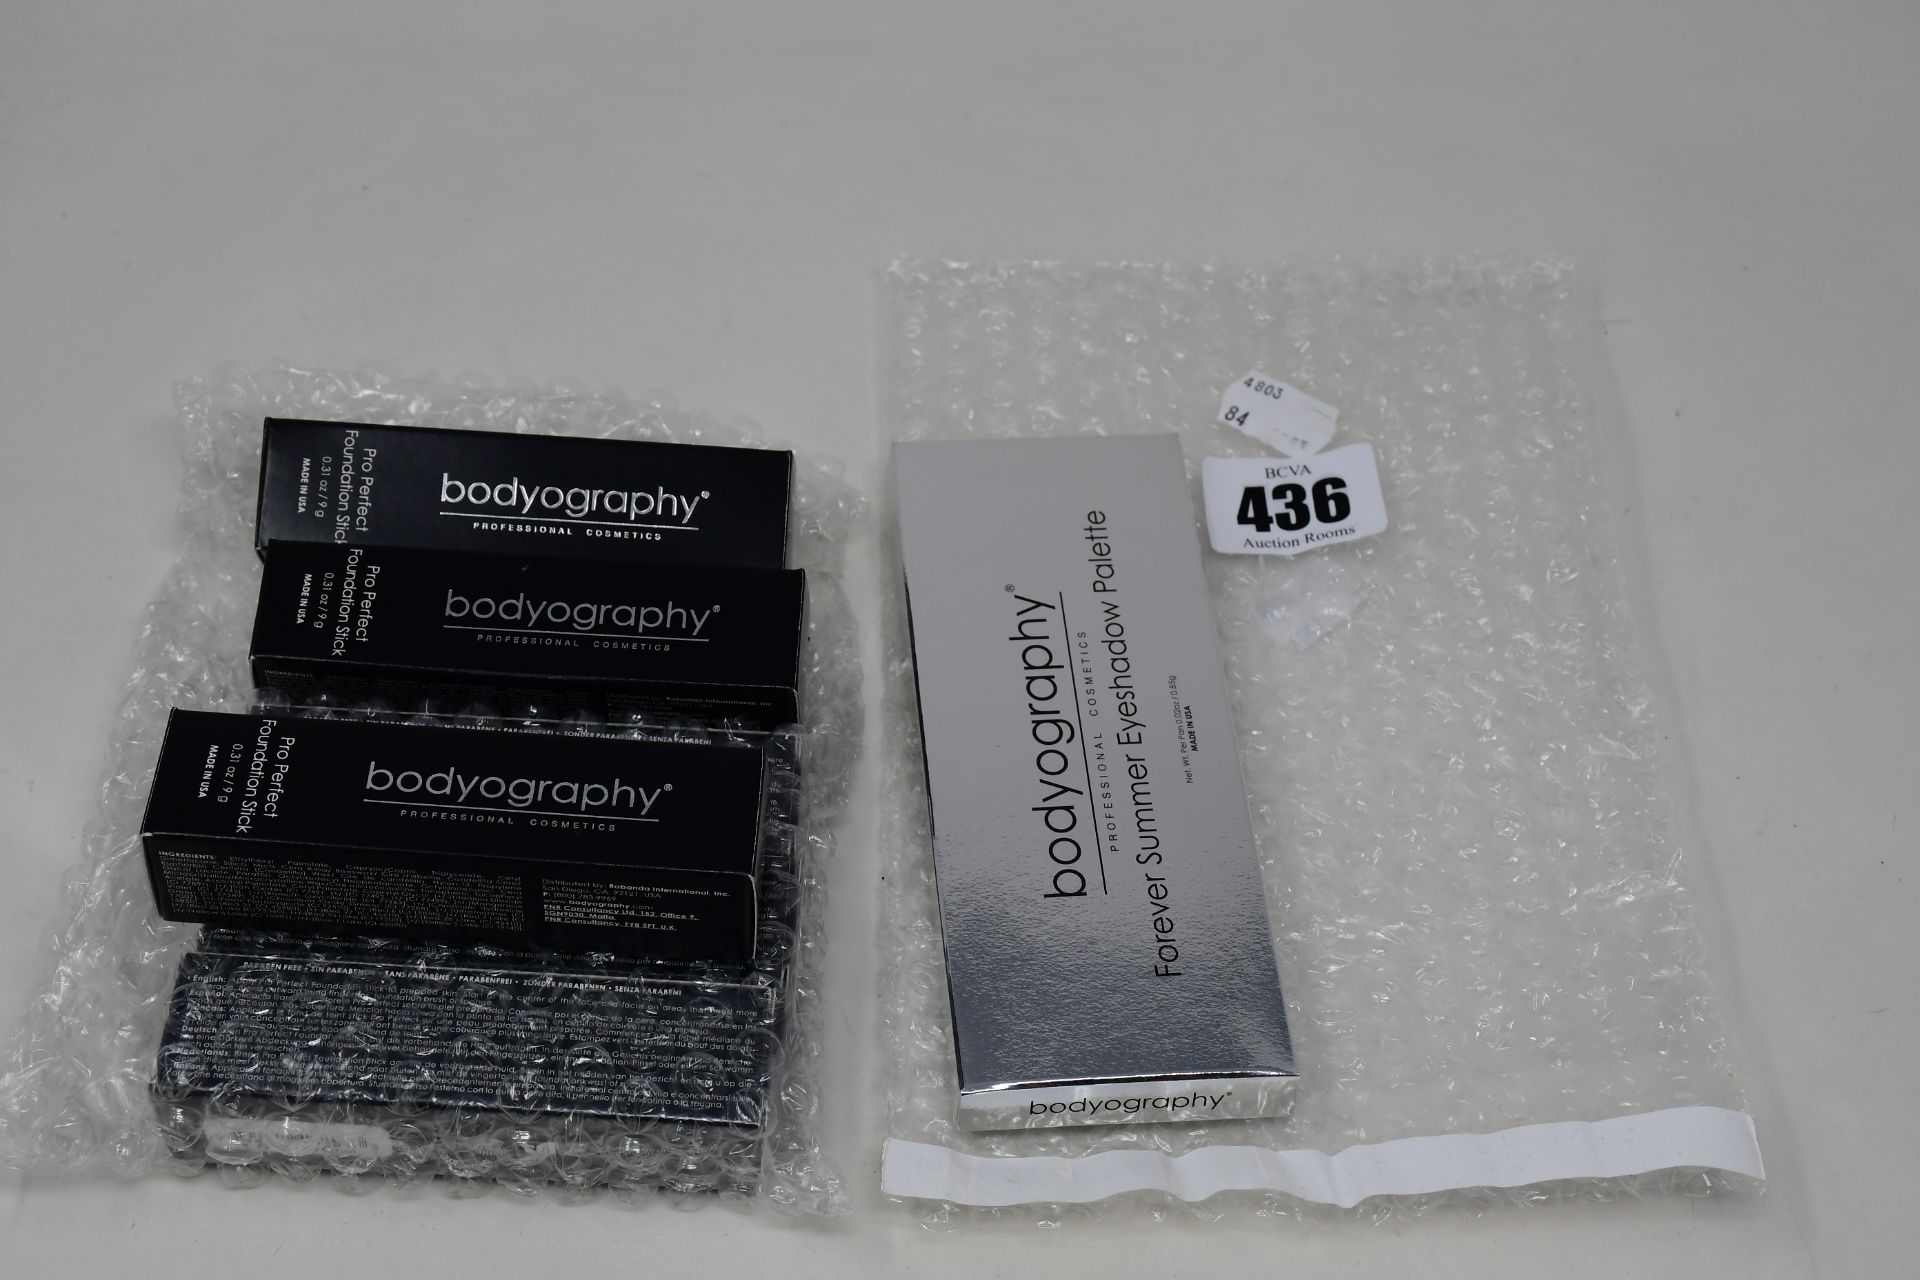 A boxed as new Bodyography Forever Summer Eyeshadow Palette and six boxed as new Bodyography Pro